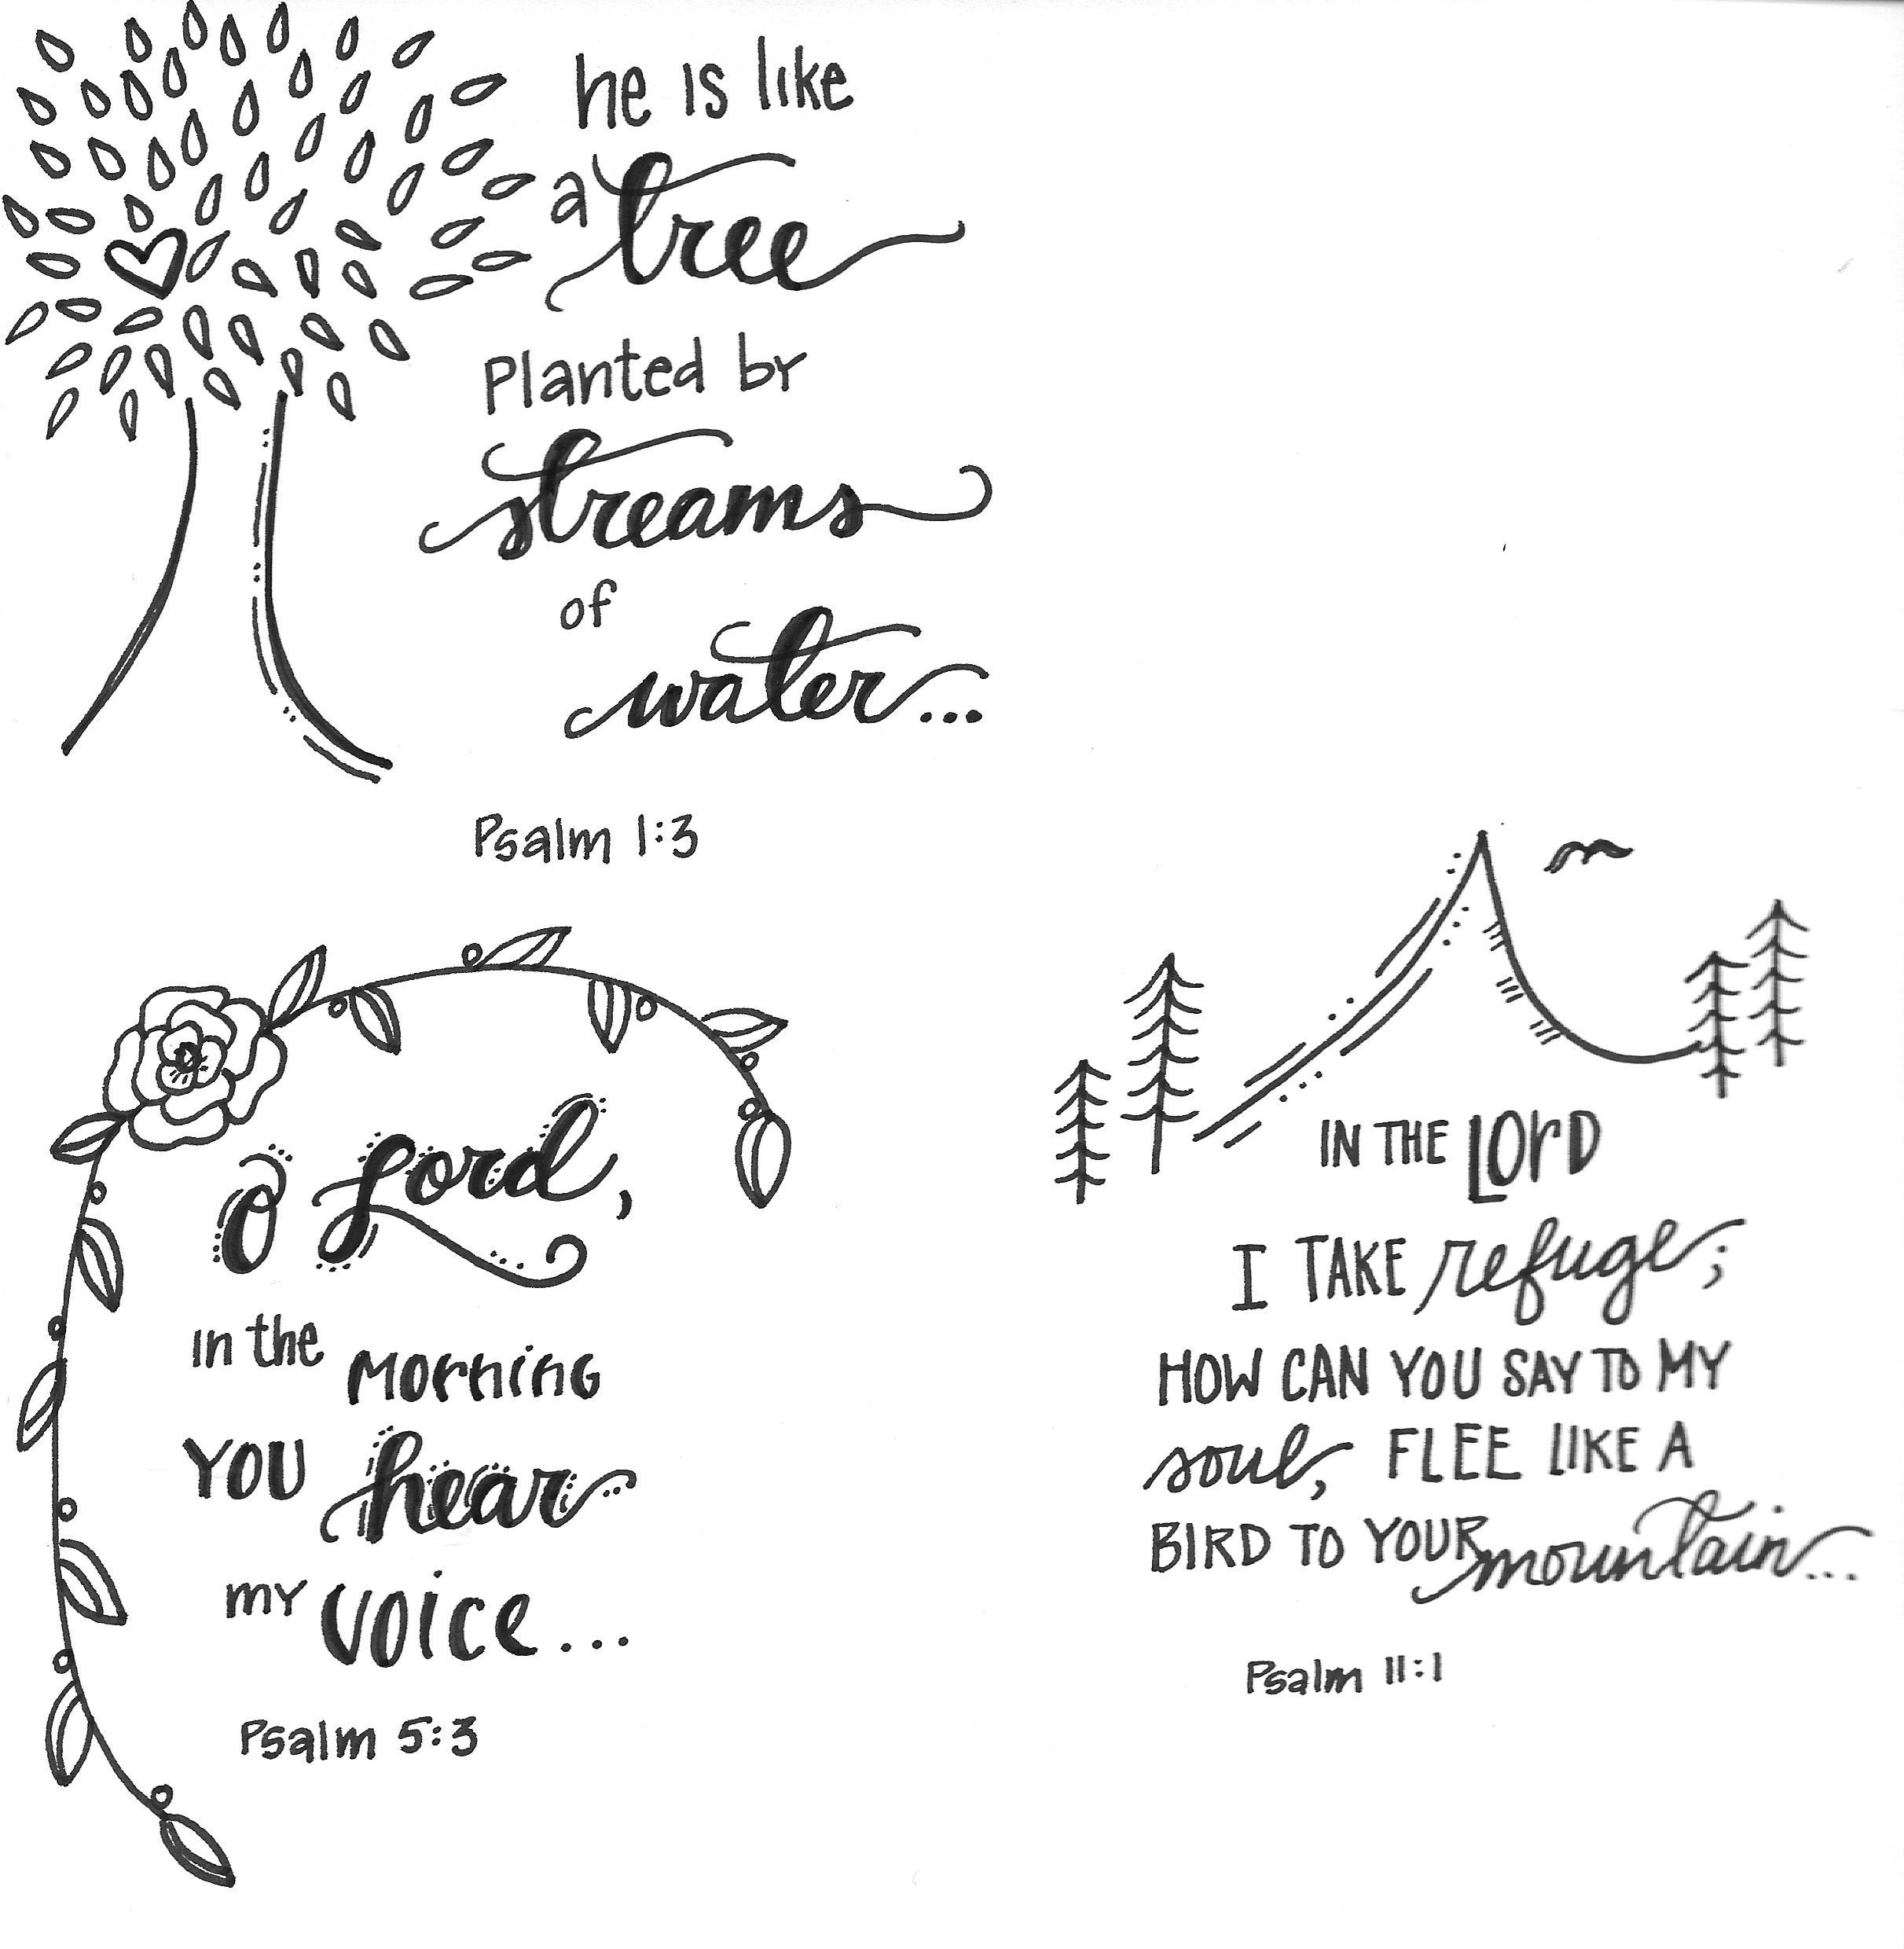 Bible Journaling: Tree Planted by Streams - Etsy